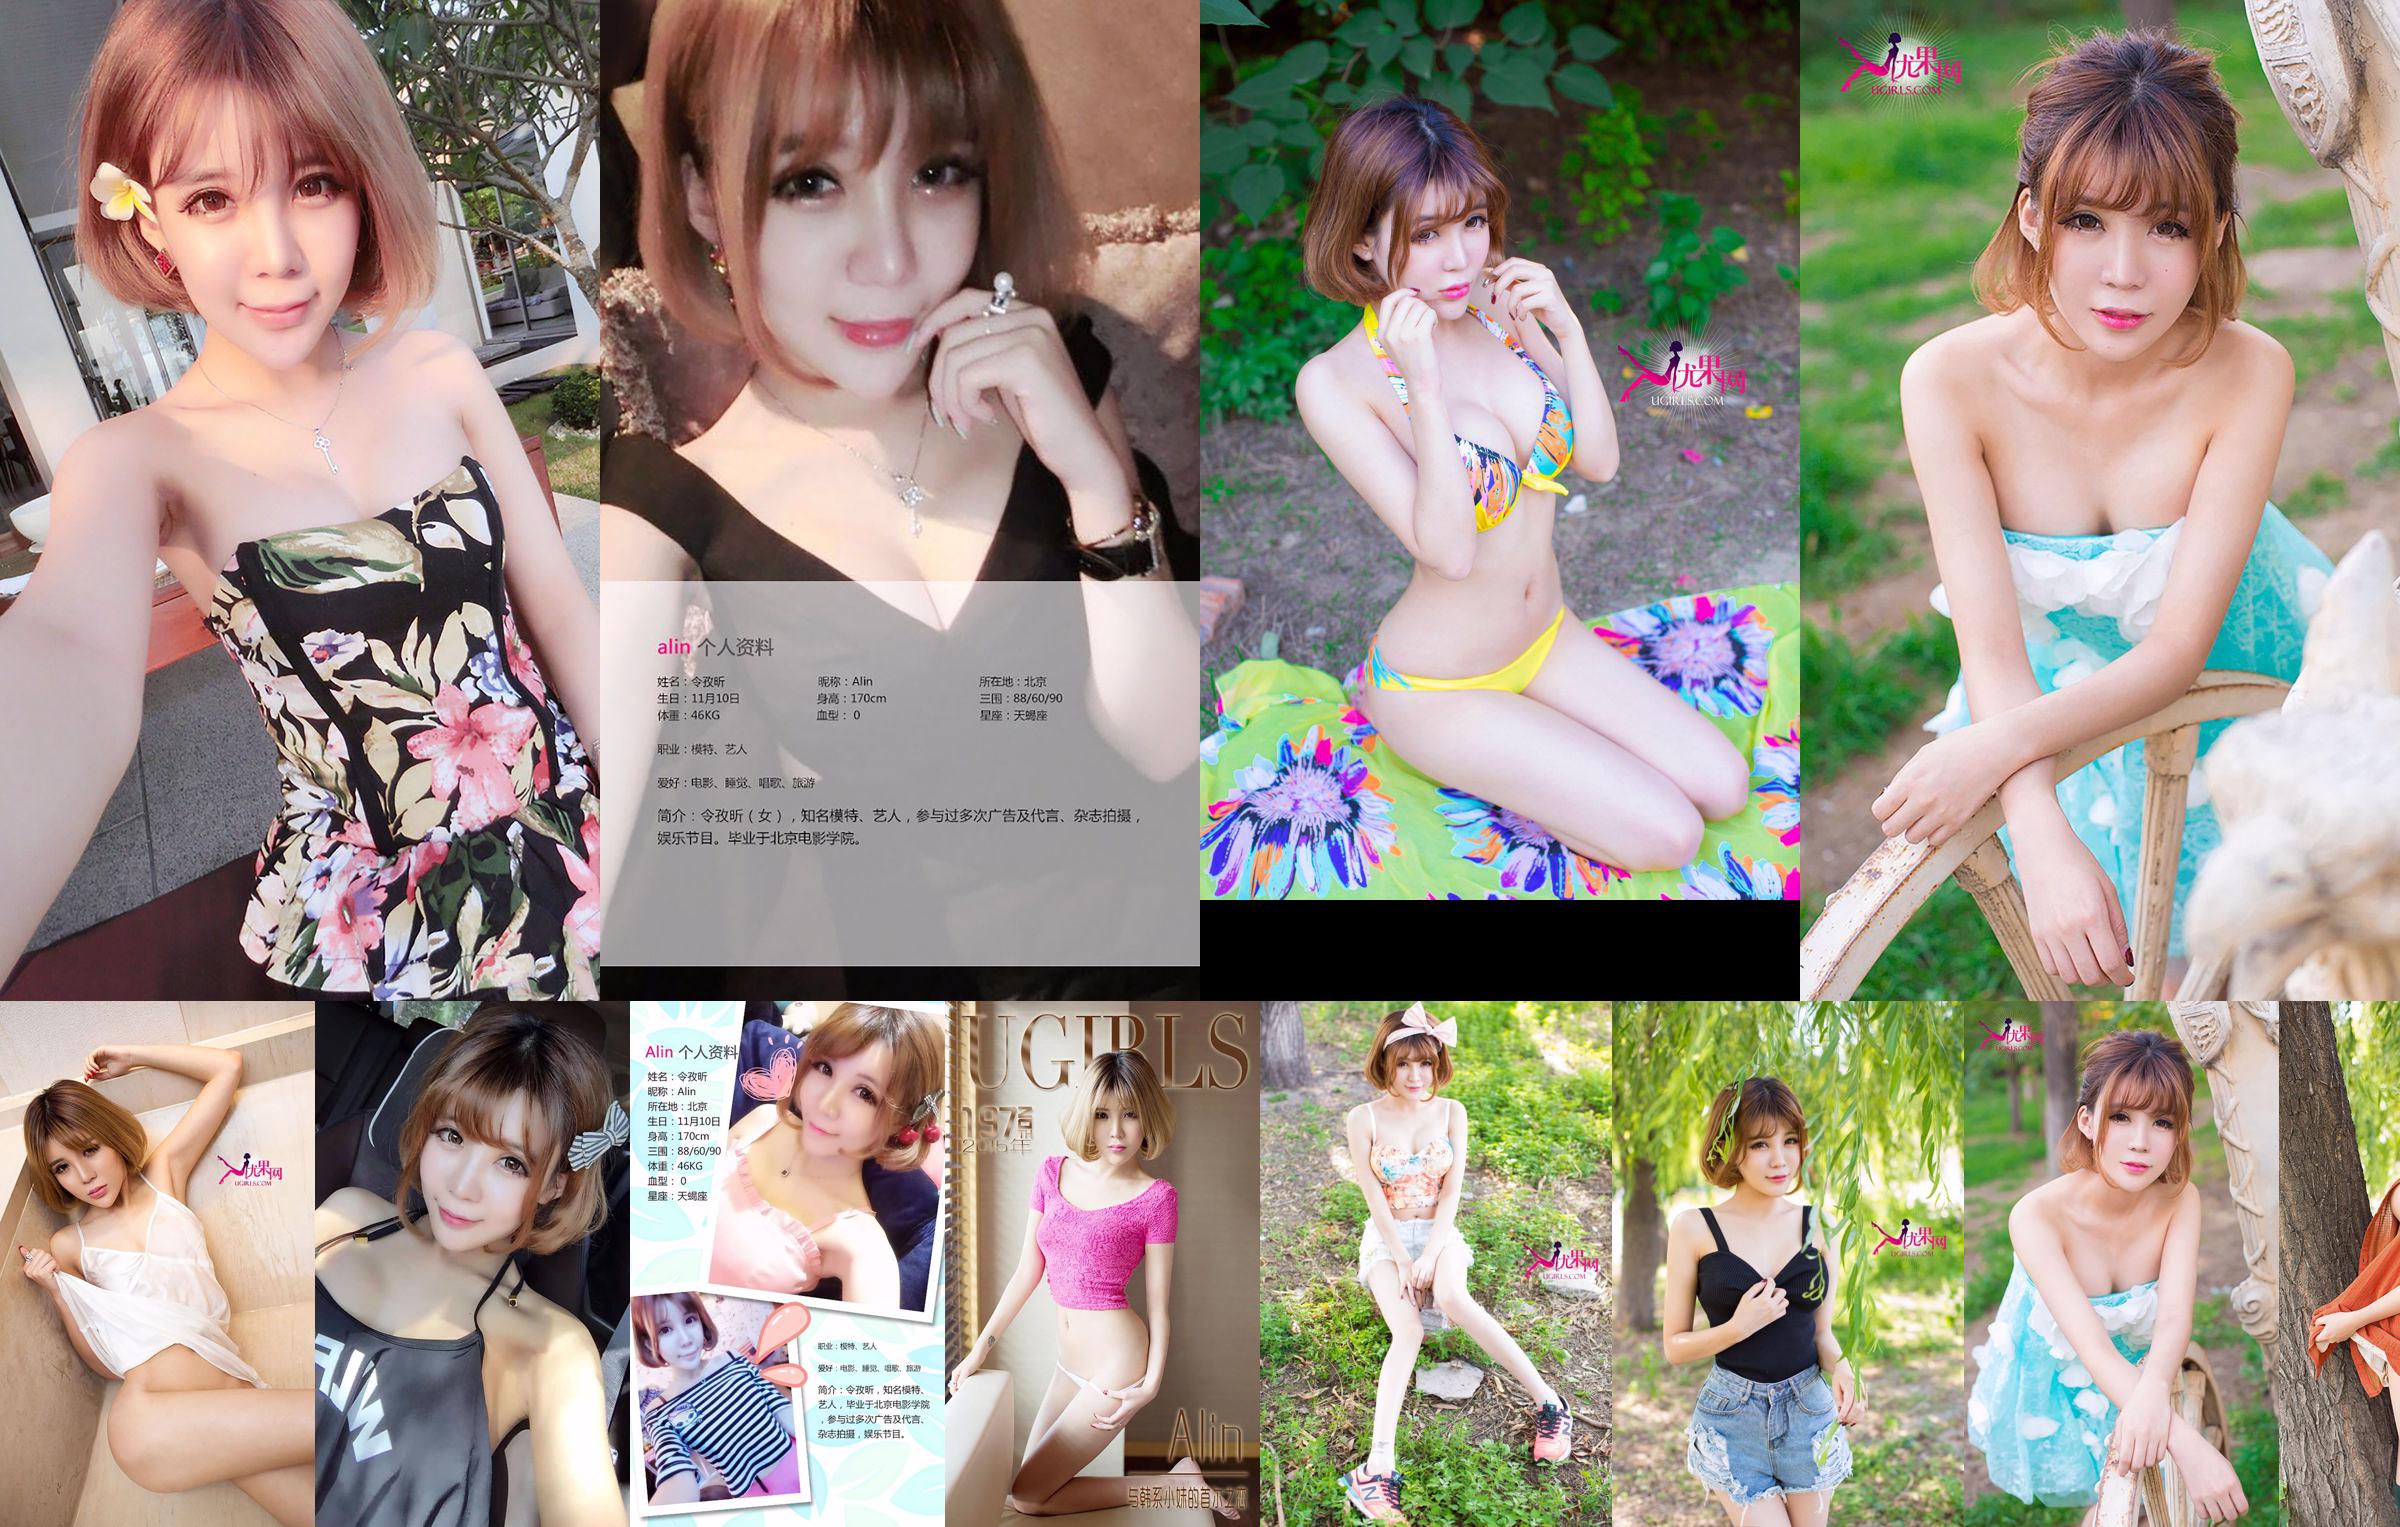 Alin(Kim Yixi baby) "Love in Seoul with a Korean girl" [爱优物Ugirls] No.197 No.96c88a Page 2